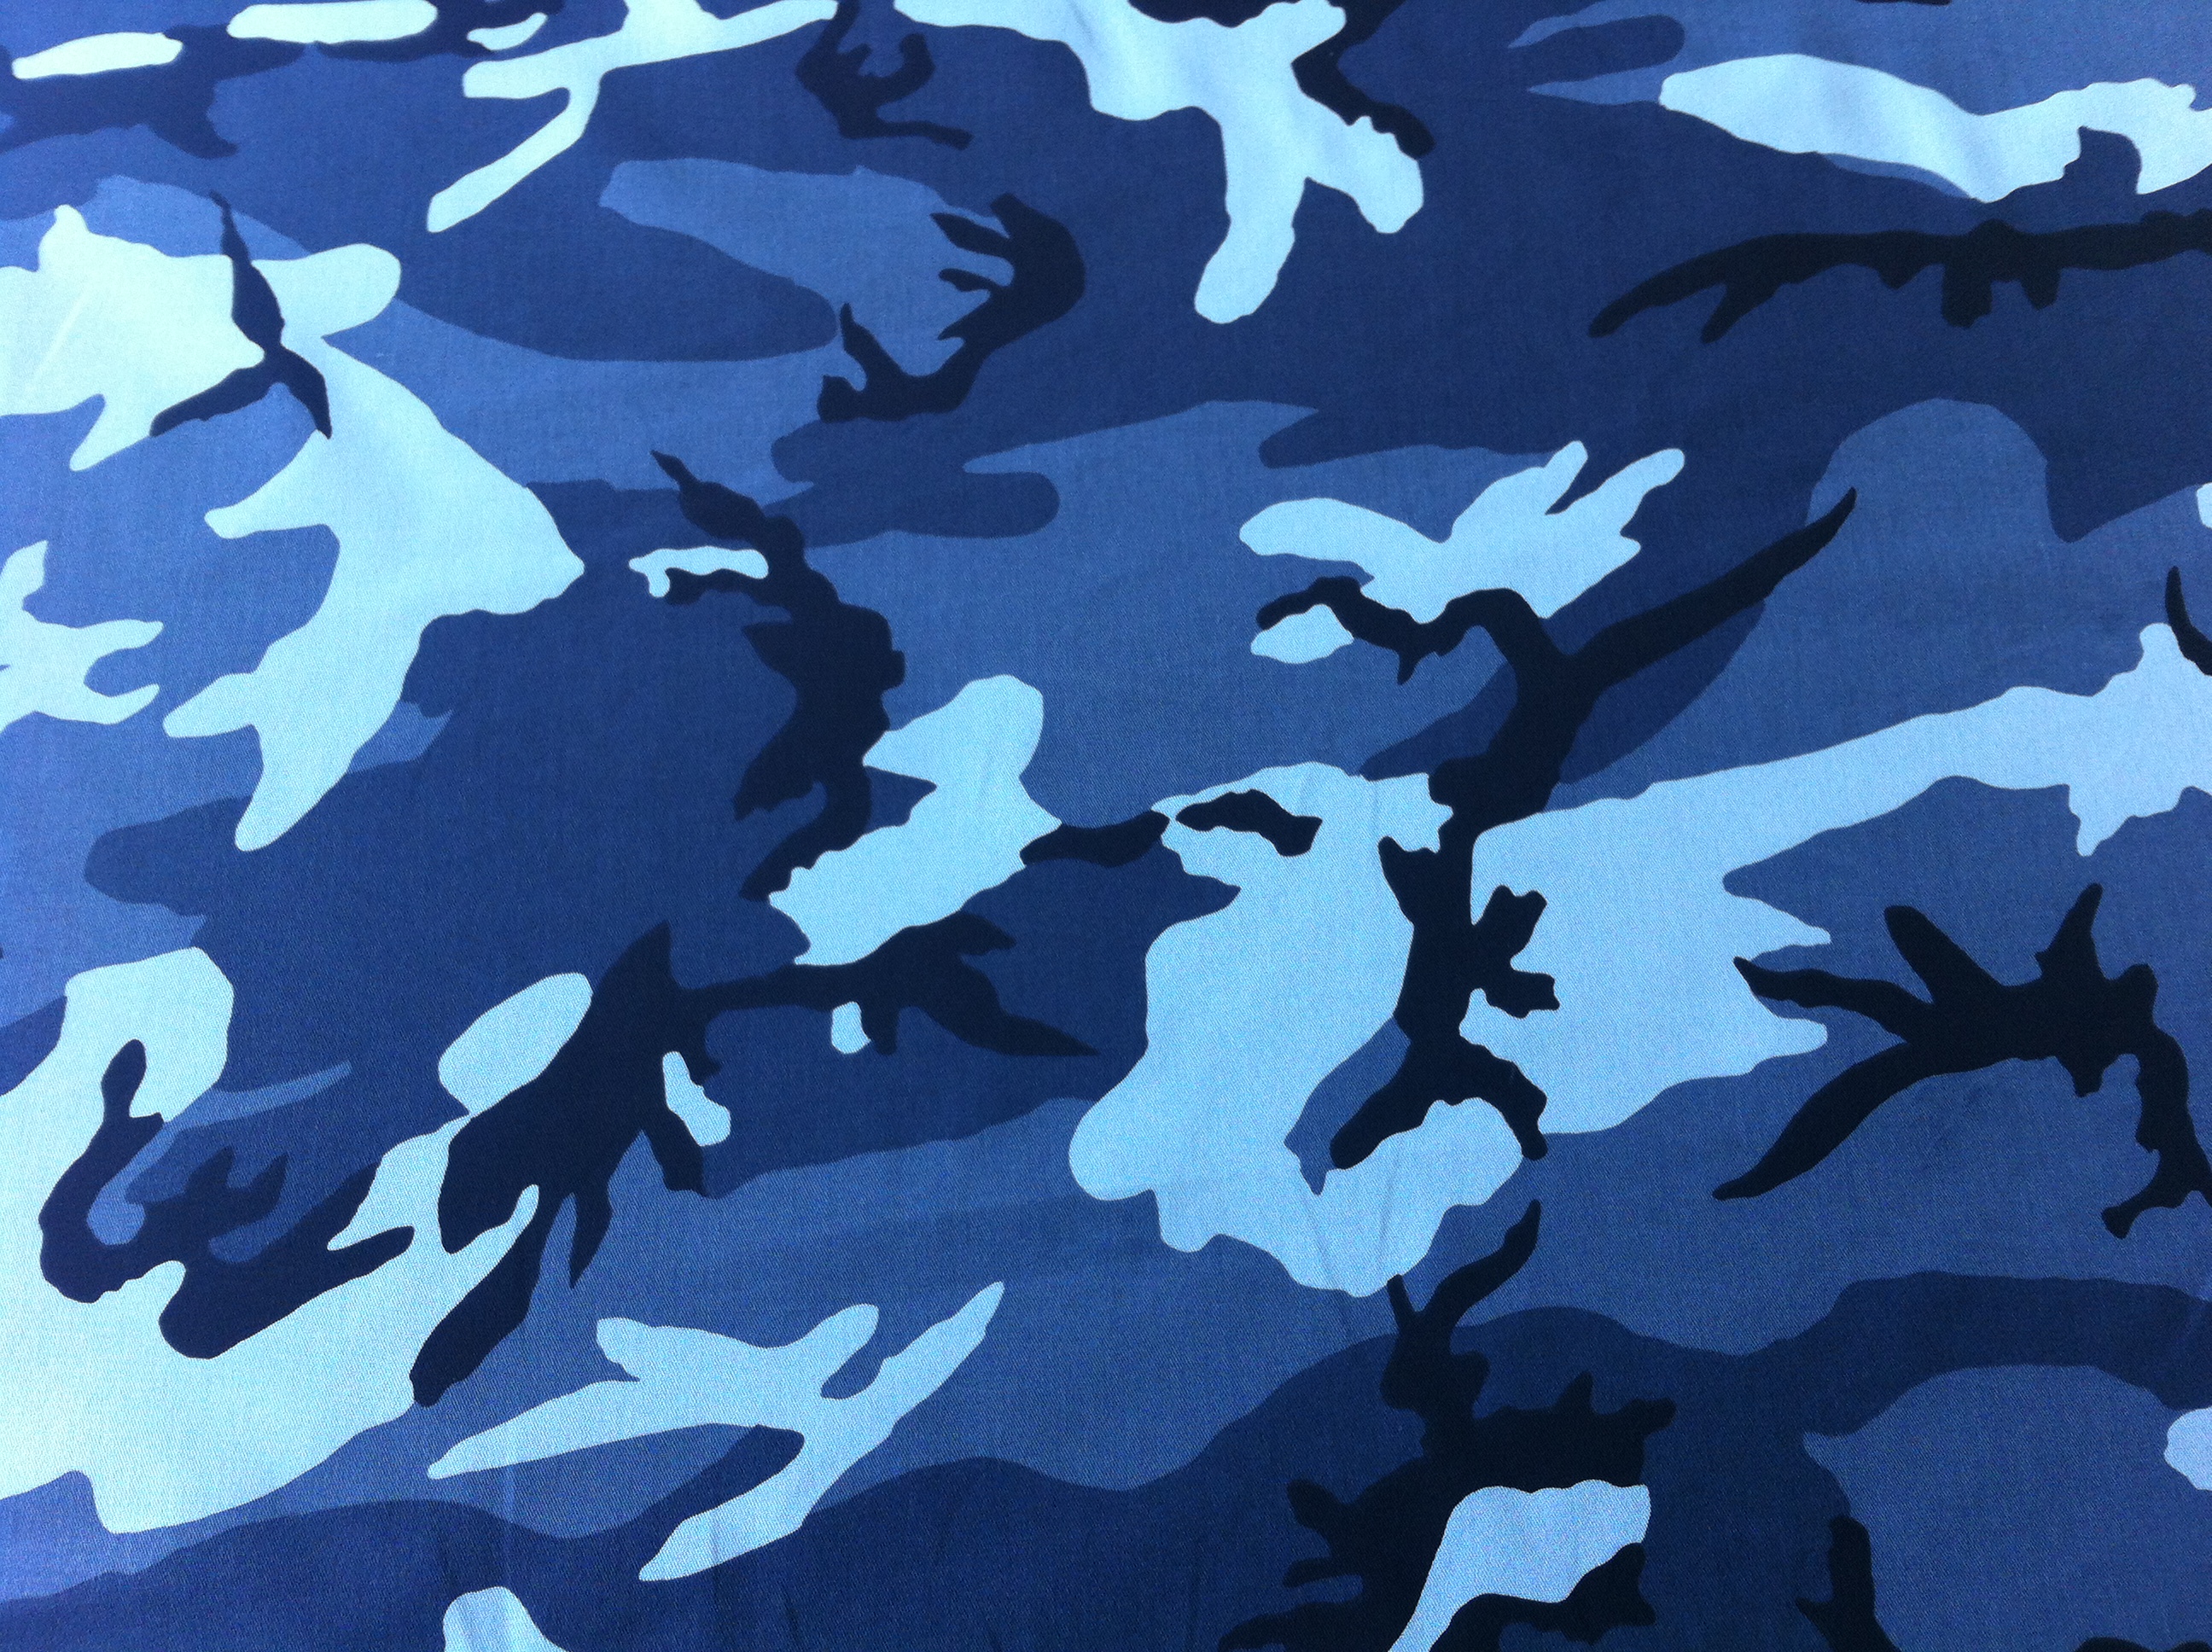 camo wallpaper hd,military camouflage,pattern,blue,uniform,camouflage